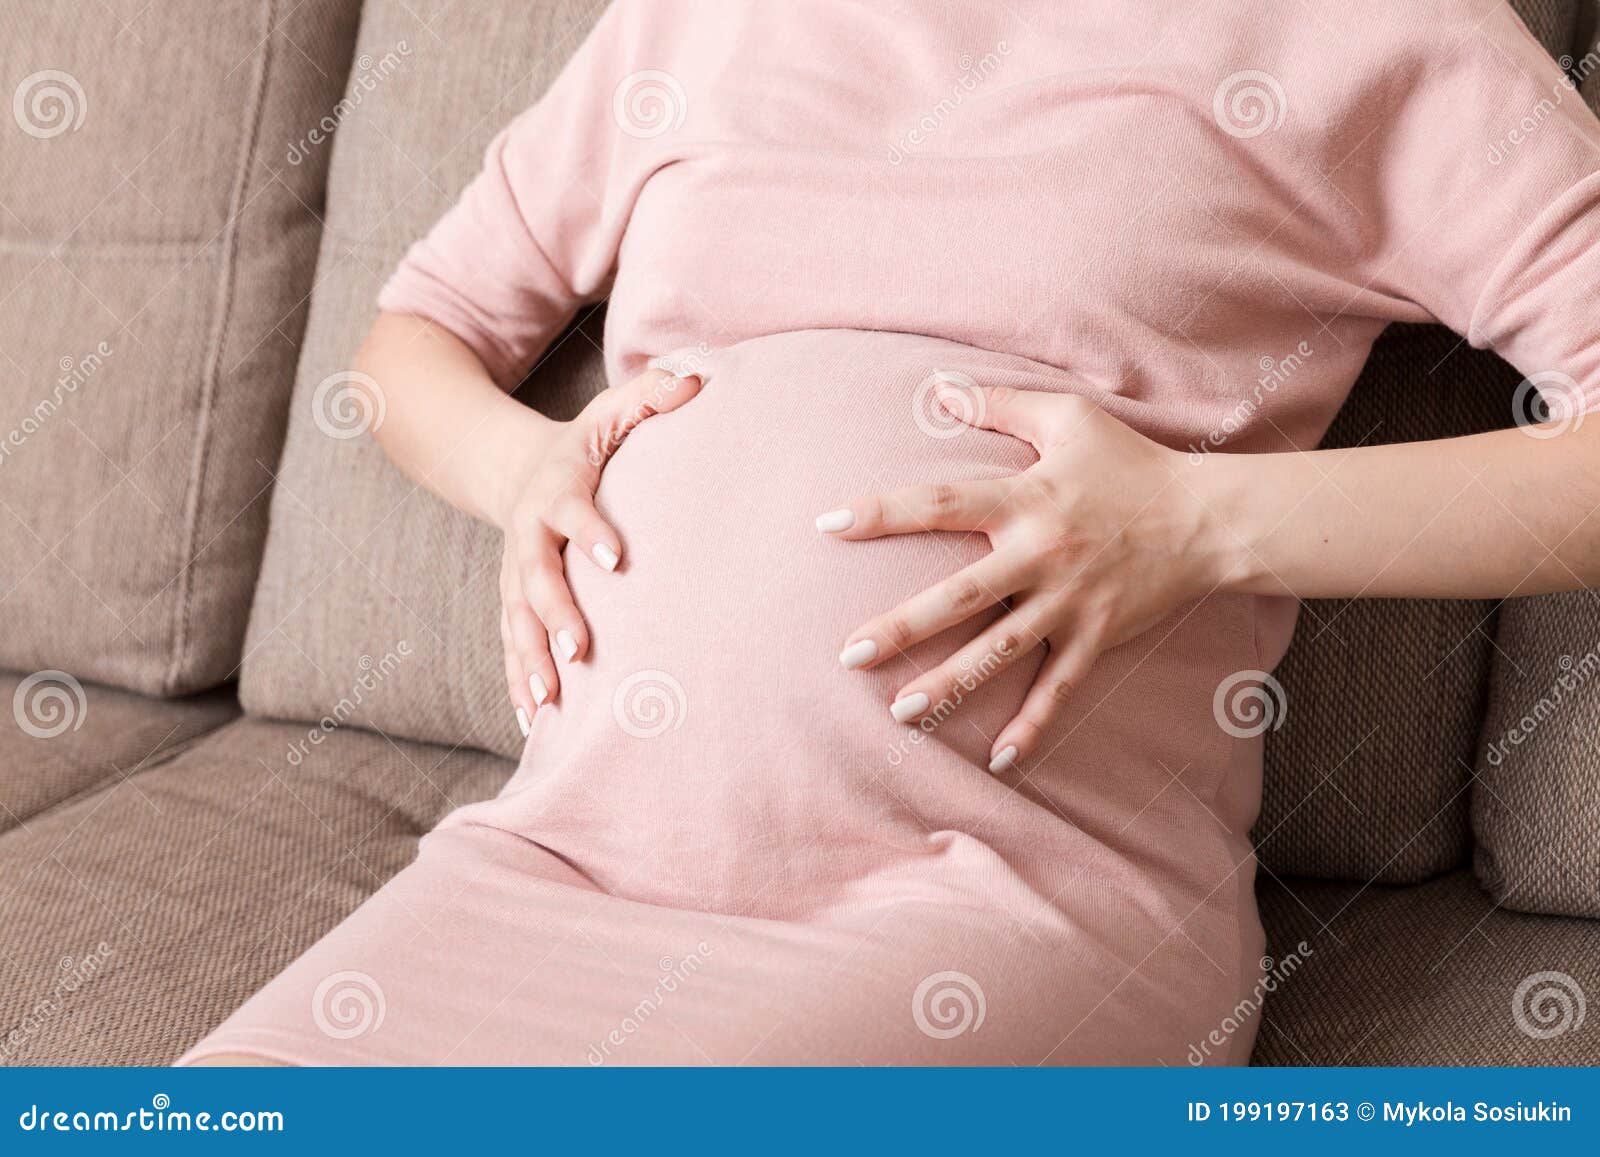 Pregnant Lady Having Massaging Lower Belly Sitting on Sofa Indoor. Pregnancy  Problems Concept Stock Image - Image of disease, belly: 199197163